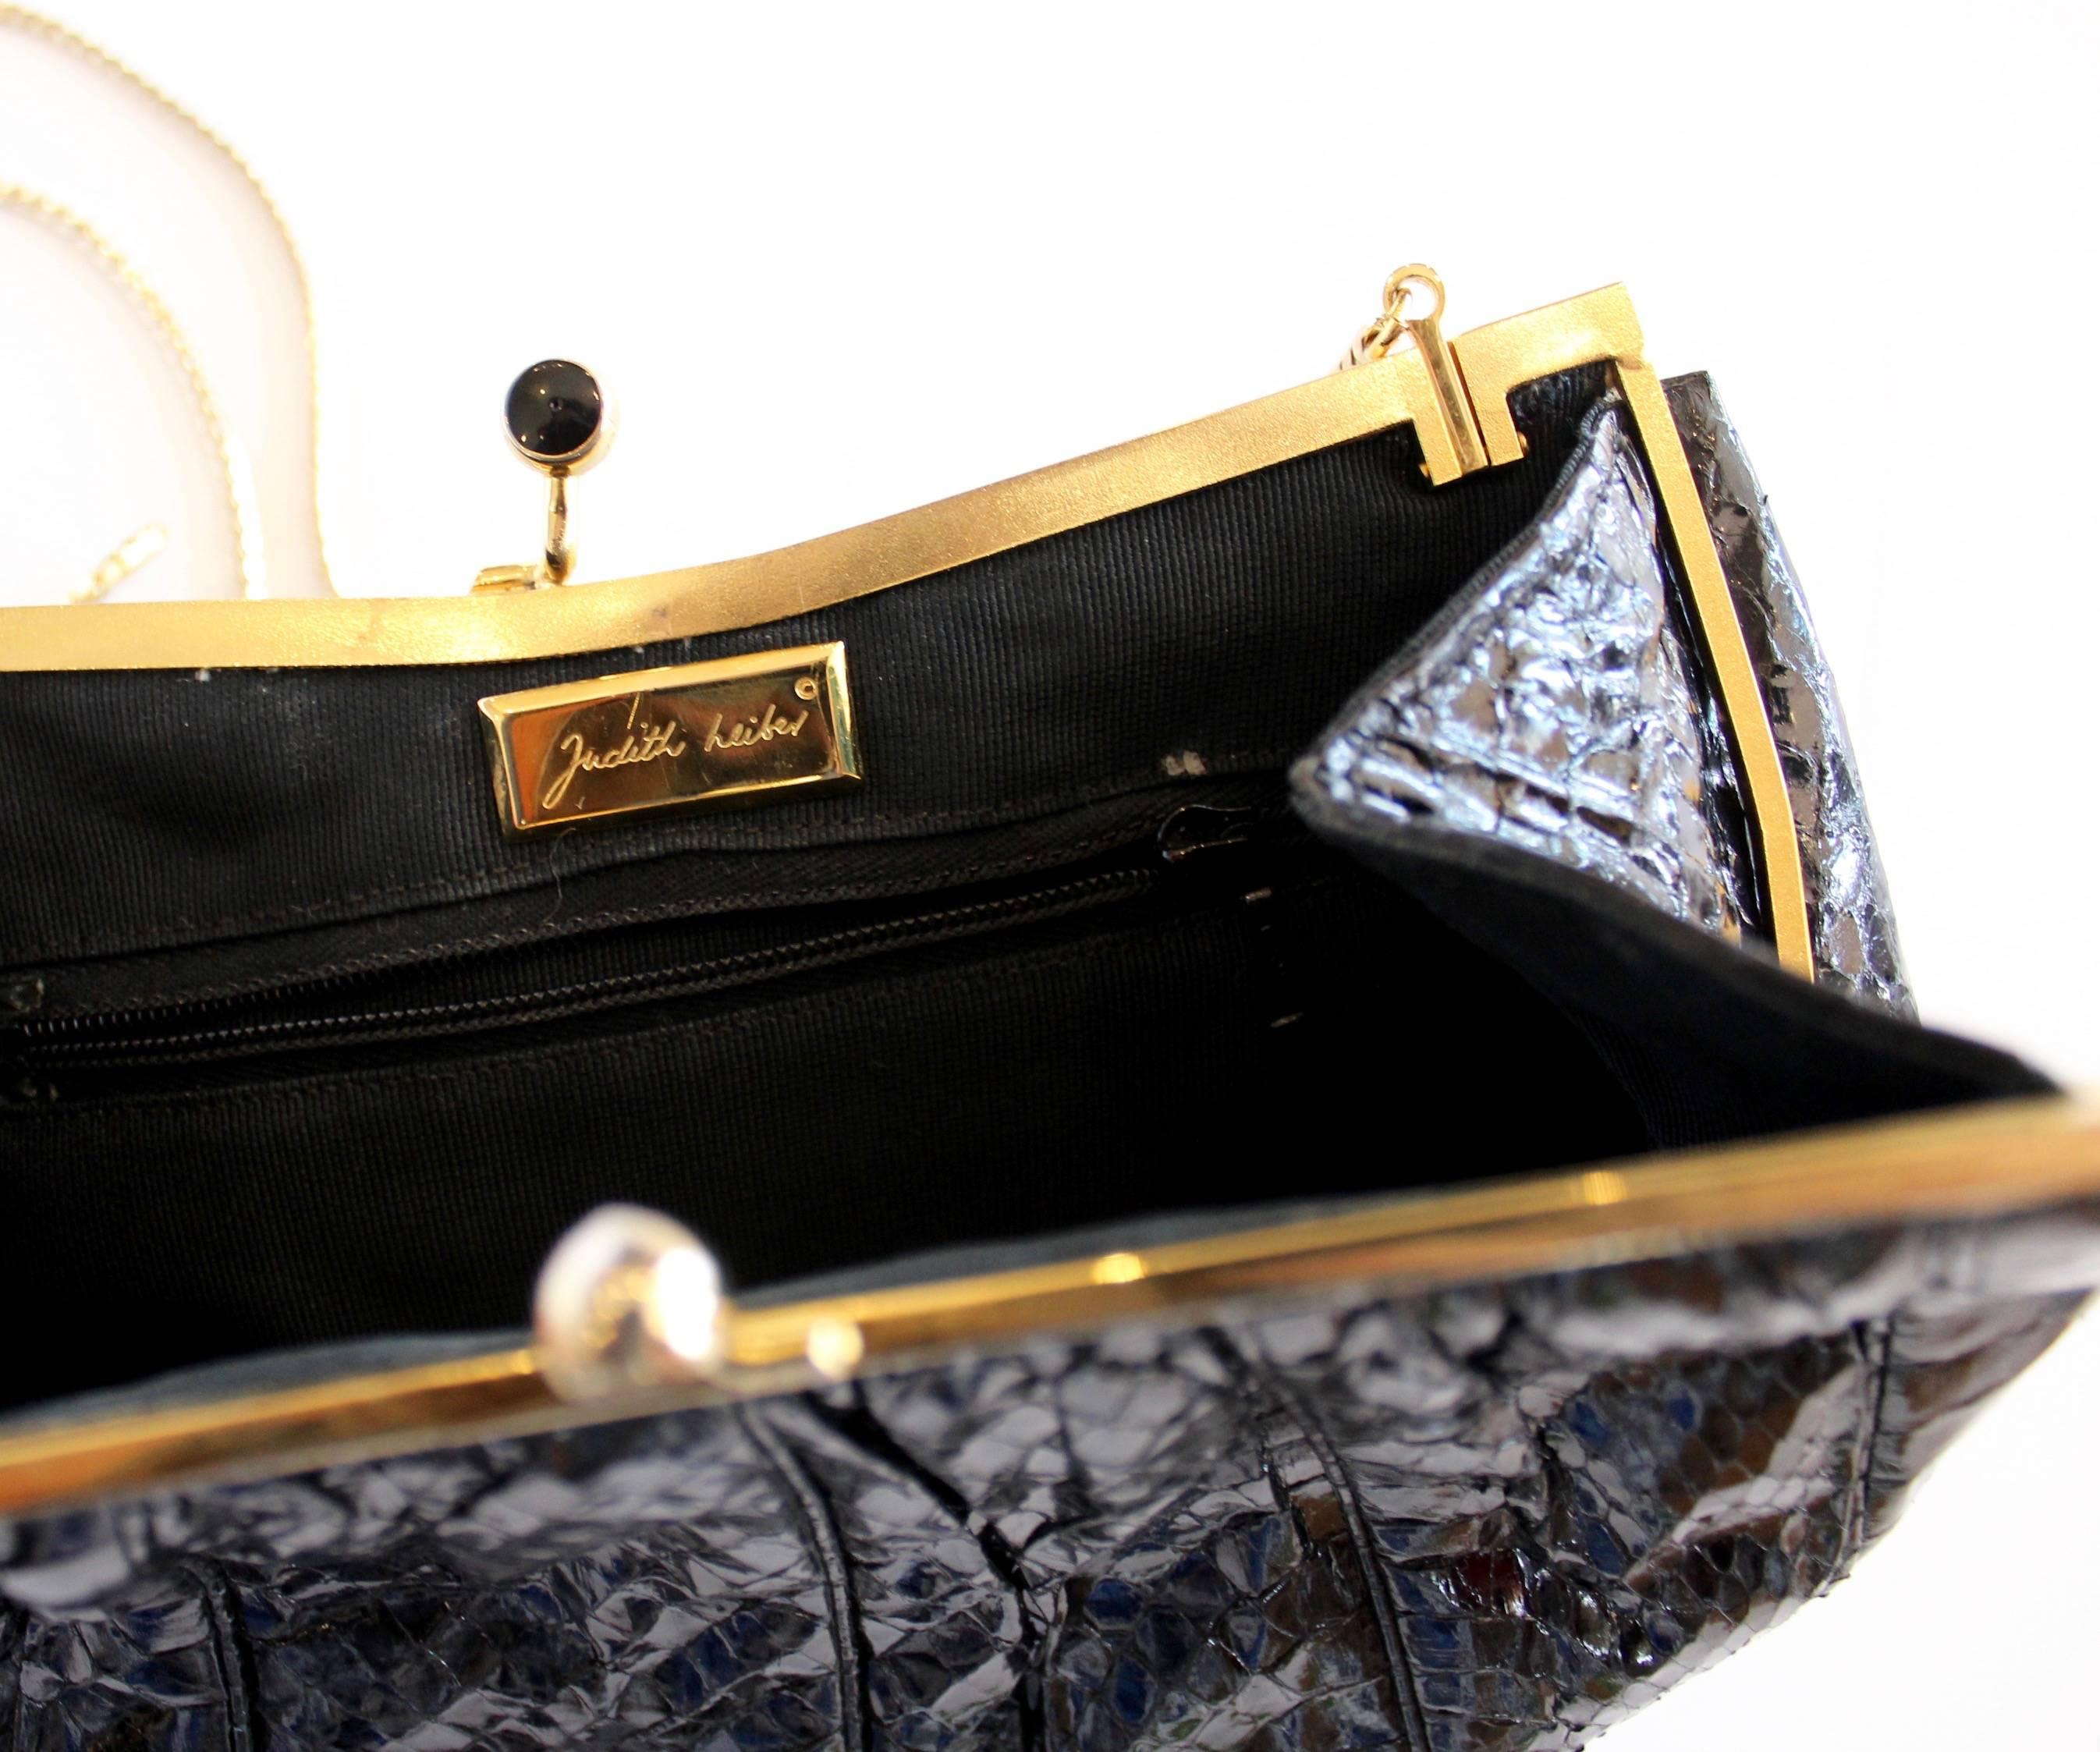 This black python Judith Leiber clutch has gold-tone hardware with black and red accents at its closure. Includes an optional gold-tone chain shoulder strap, perfect for a night out dancing!  The interior boasts a satin lining with a zippered wall